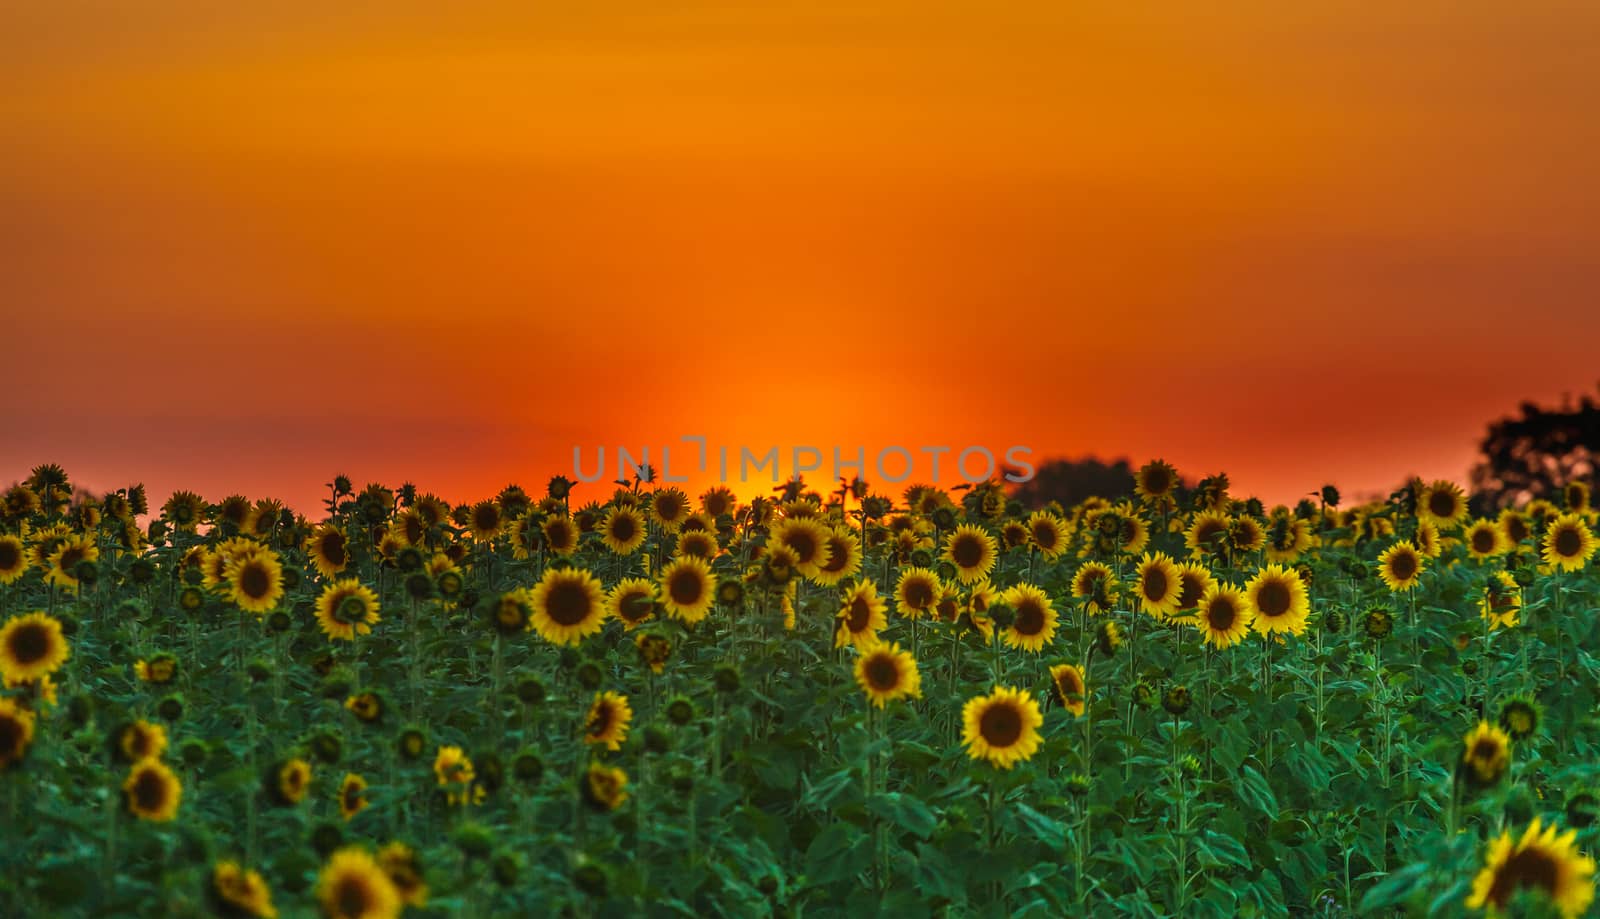 Field of sunflowers on a background of red sky.